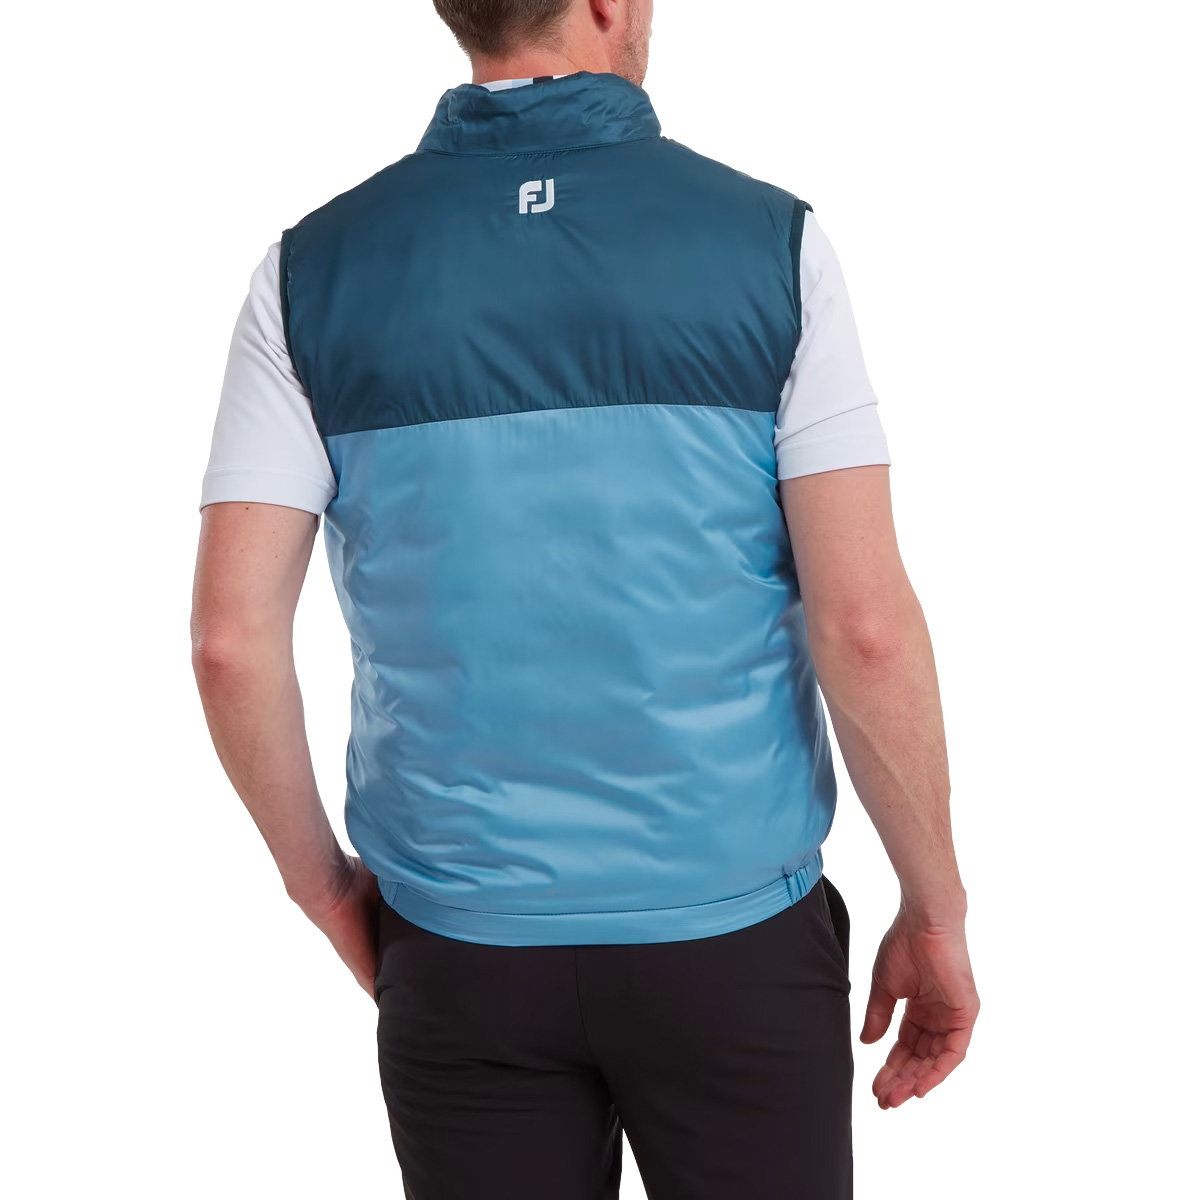 FootJoy Lightweight Thermal Insulated Vest Gilet 